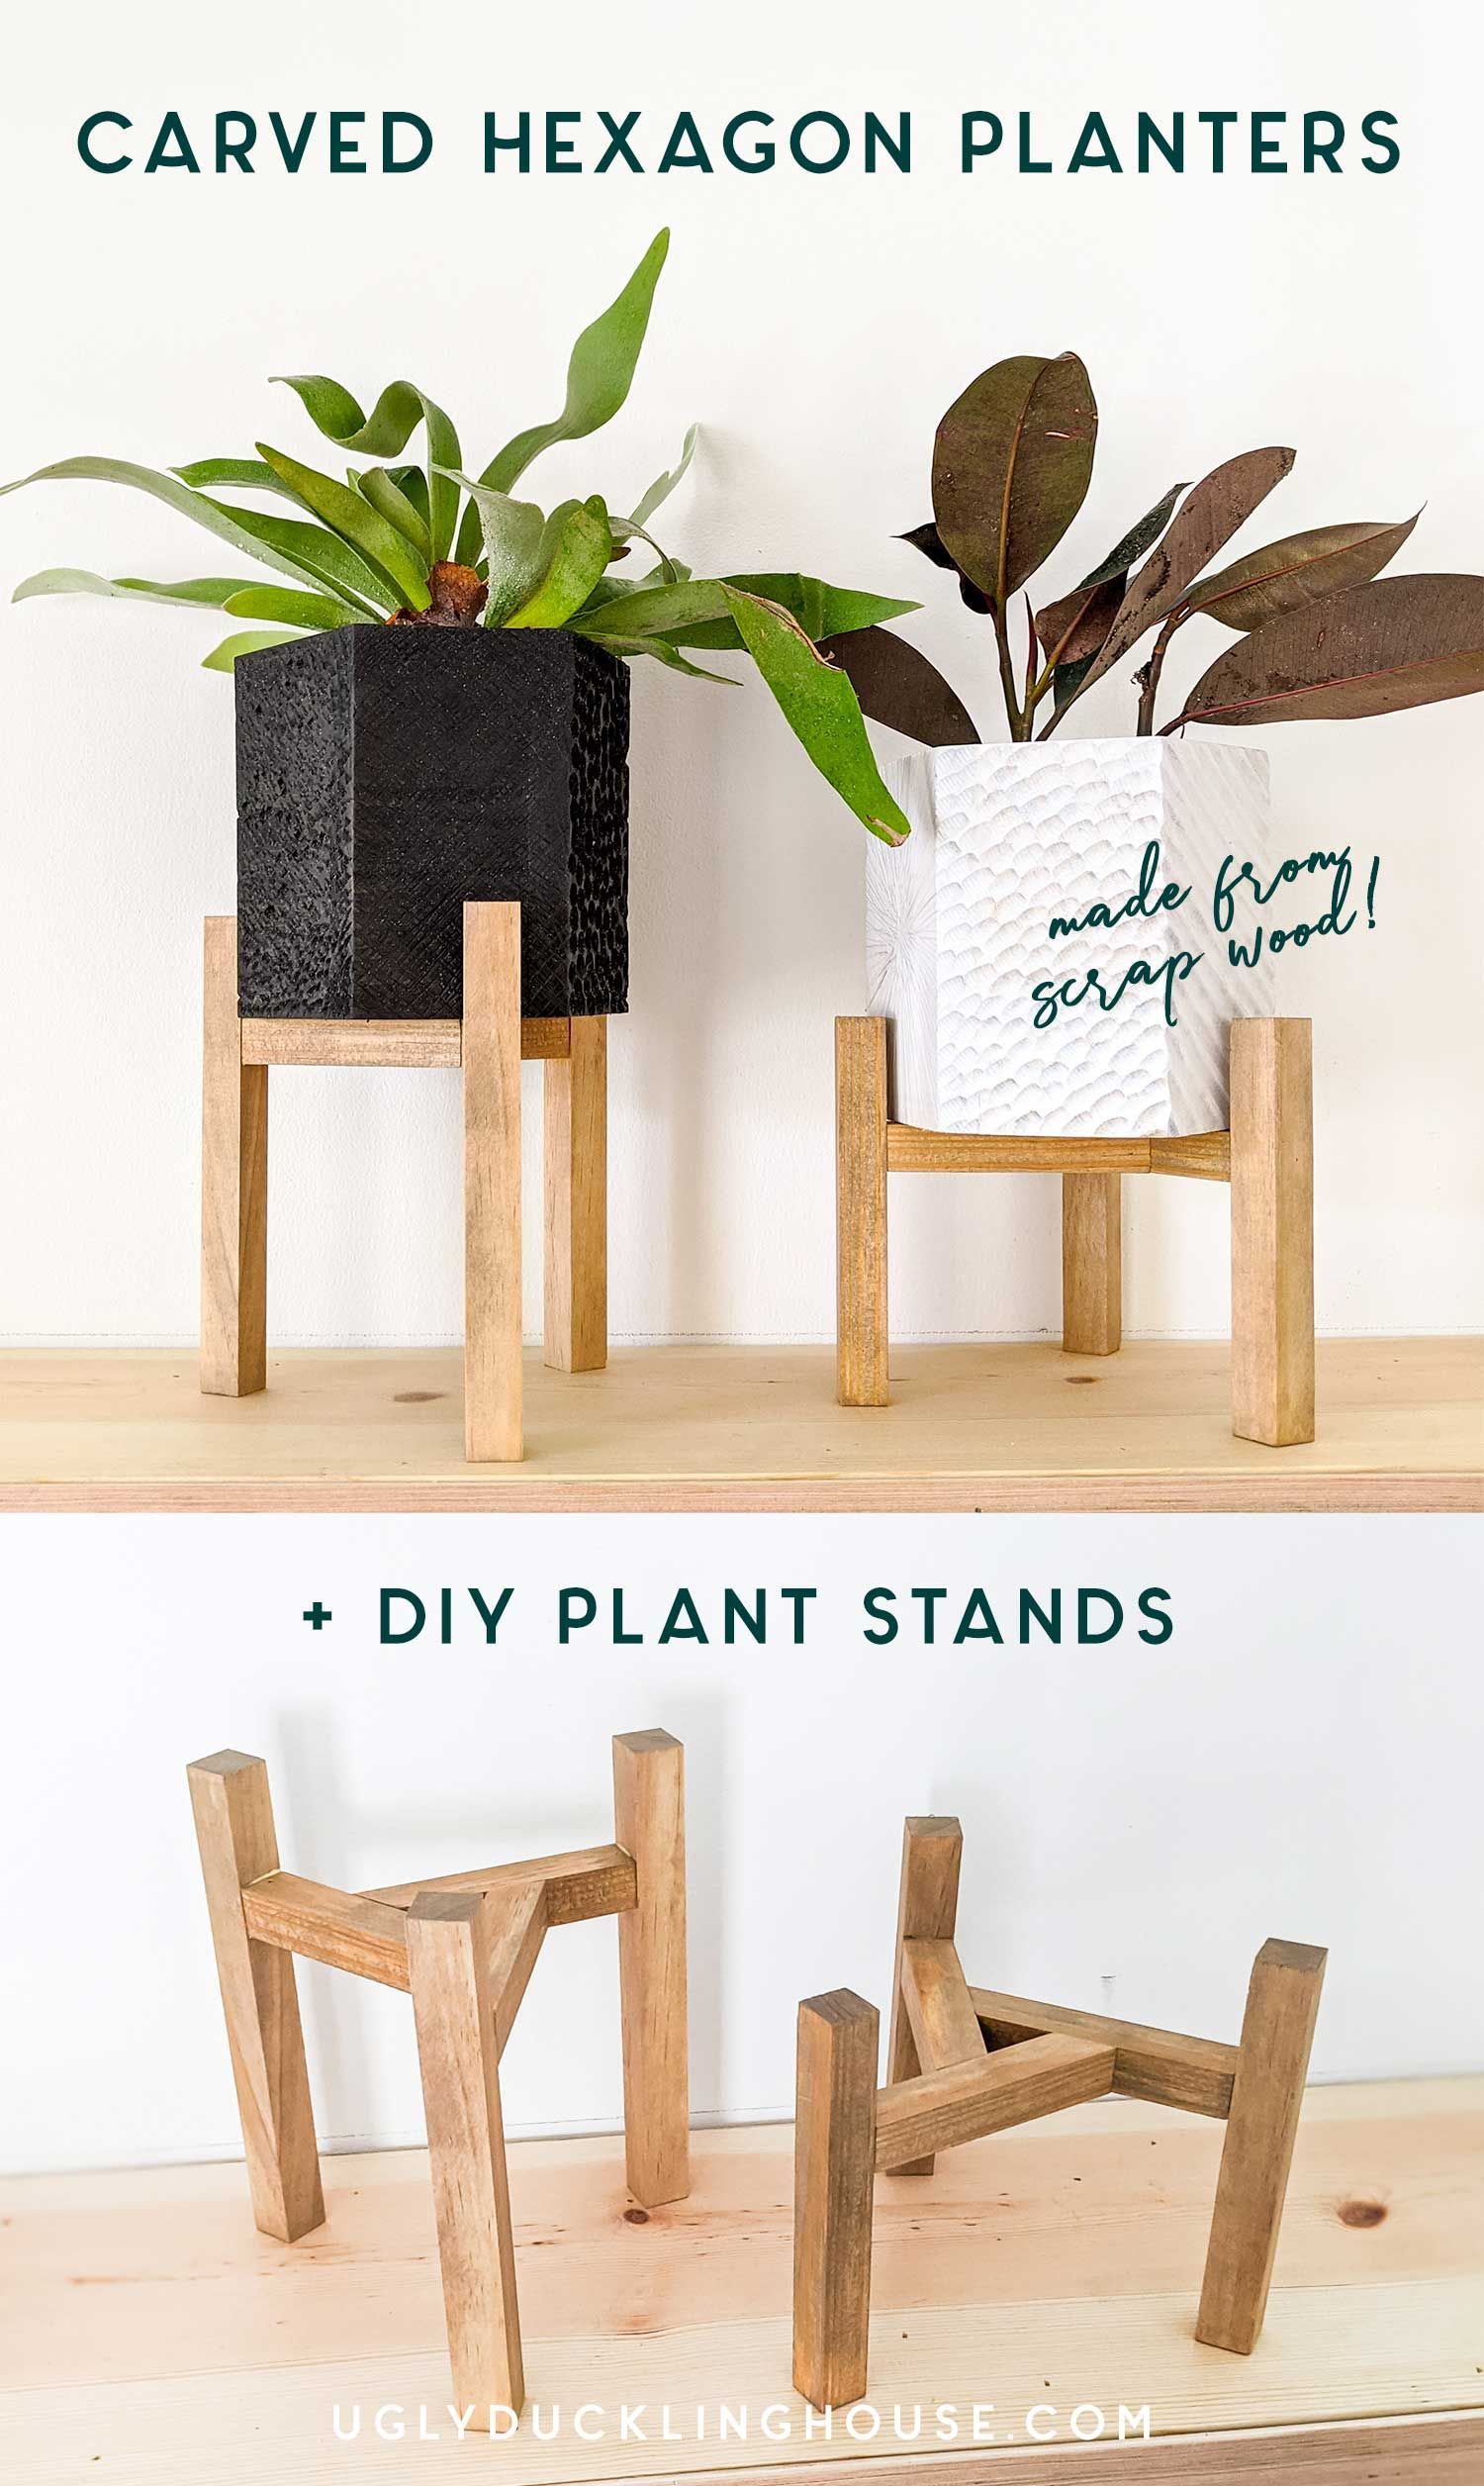 Carved Hexagon Planters + Plant Stands | Diy Plant Stand, Wood Projects,  Woodworking Projects Diy Pertaining To Carved Plant Stands (View 7 of 15)